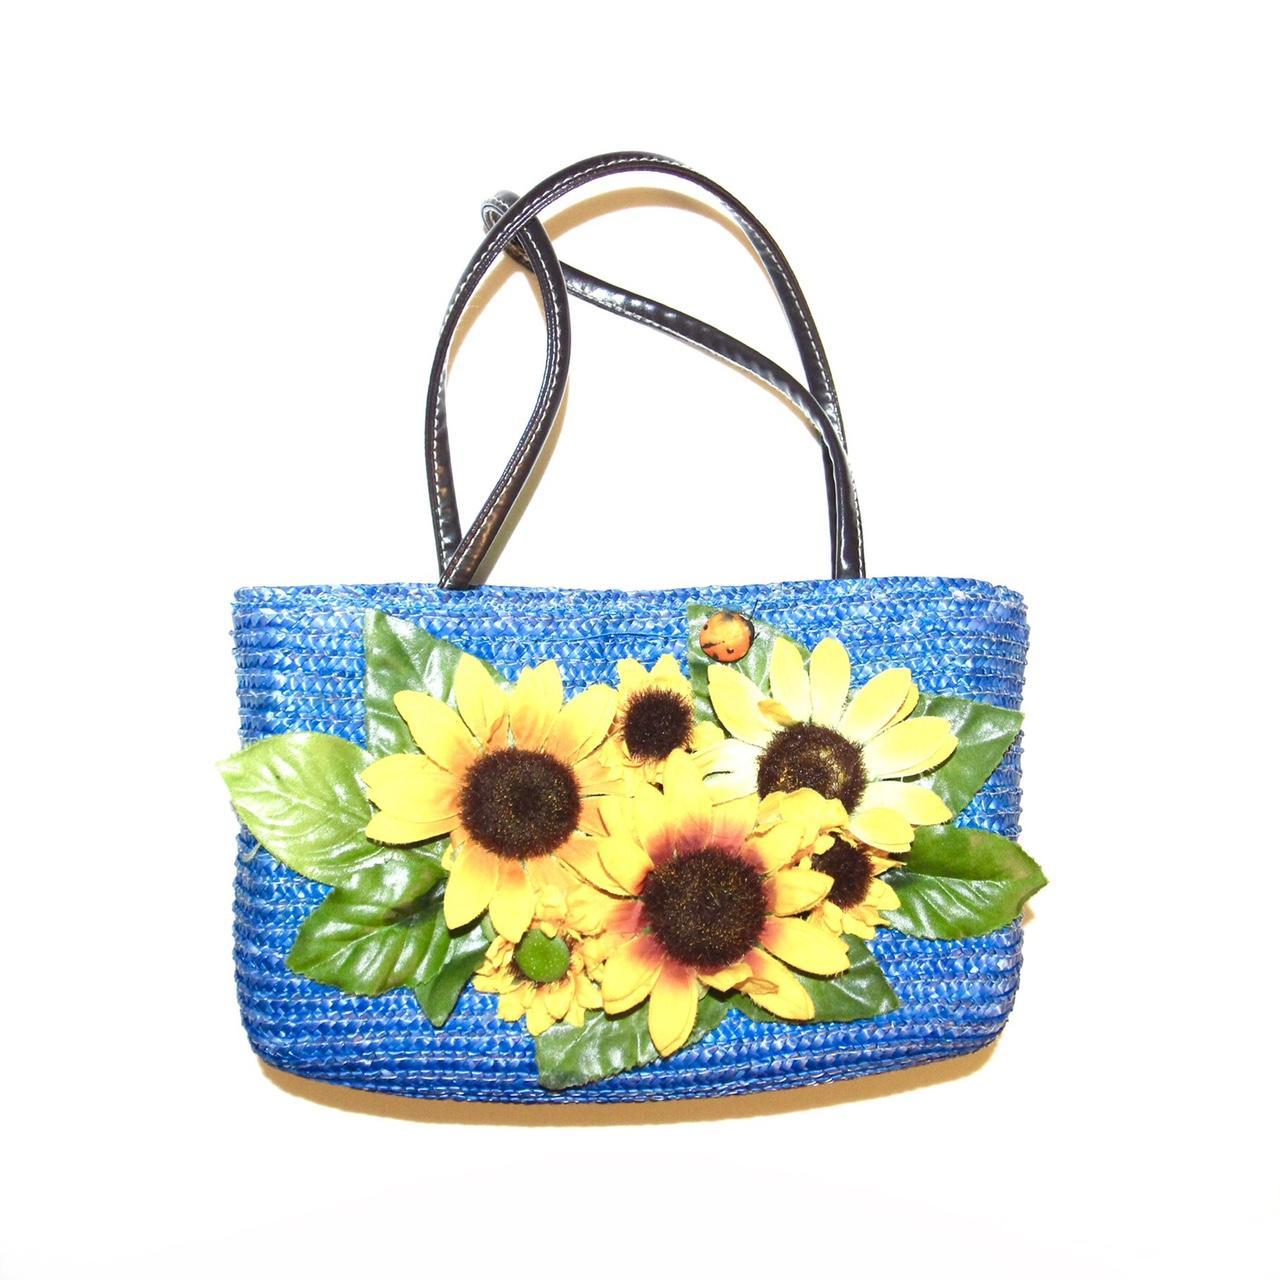 Woven Flower Basket Decorative Wicker Purse Small Beach Tote Straw Portable  Holder Vegetable Carrying Bag Petal Hand-woven - AliExpress